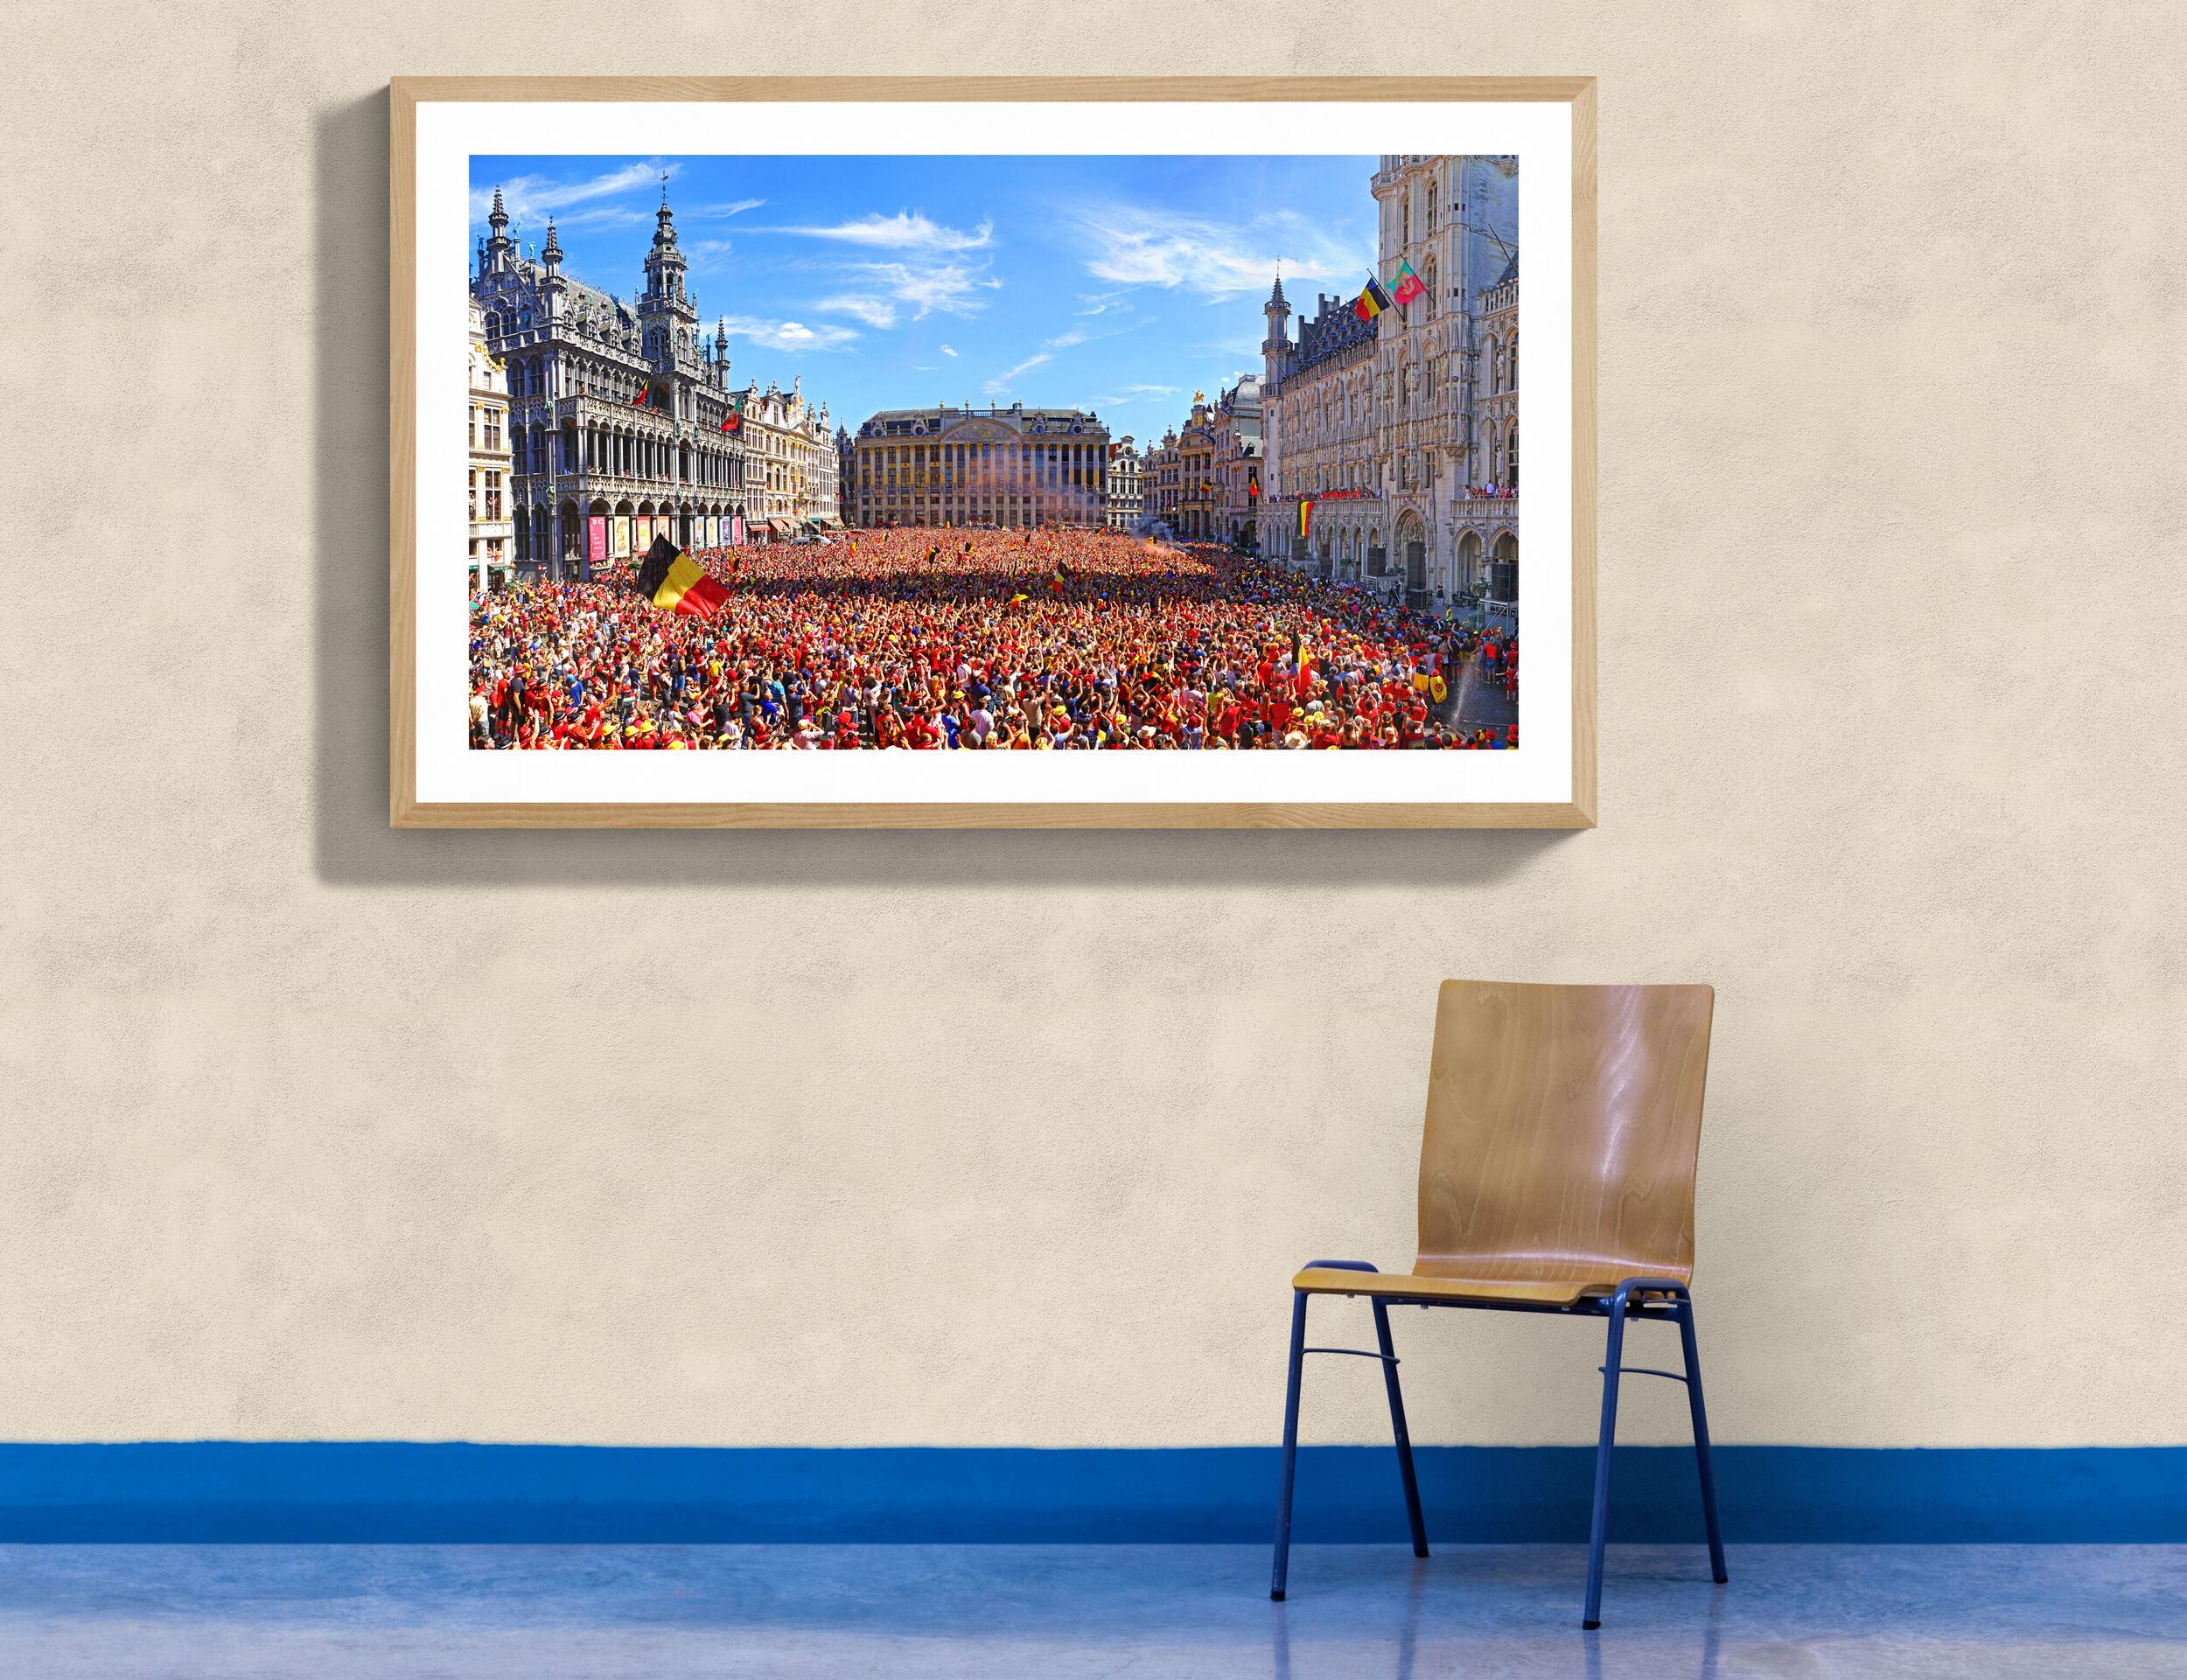 Pigment photographic paper - photography & fine art print © Jean Pierre De Neef - Panoramic cityscape made from 16 pictures
The red devils' triumphant return to the Grand Place in Brussels on July 15, 2018 after taking third place at the FIFA World